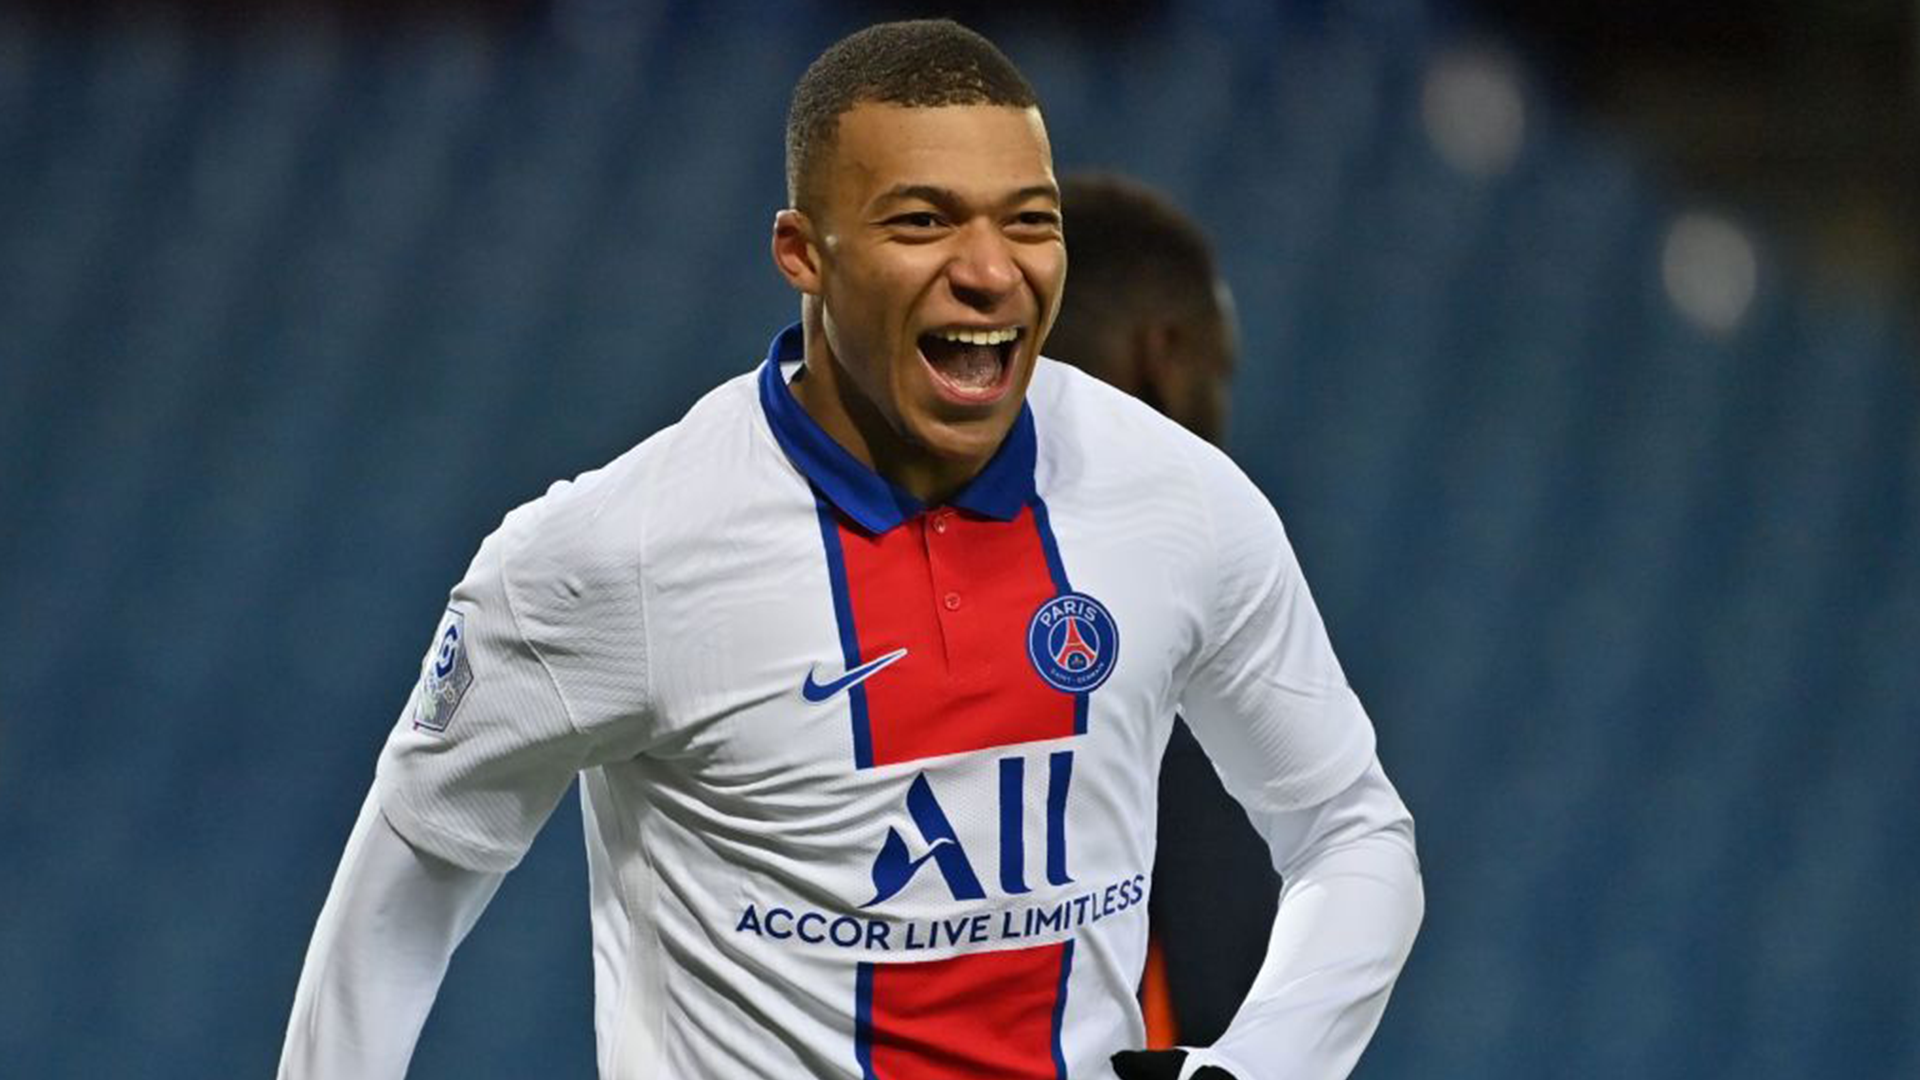 Kylian Mbappé Surpasses Cristiano Ronaldo and Lionel Messi As The Highest-Paid Soccer Player In The World, Report Says